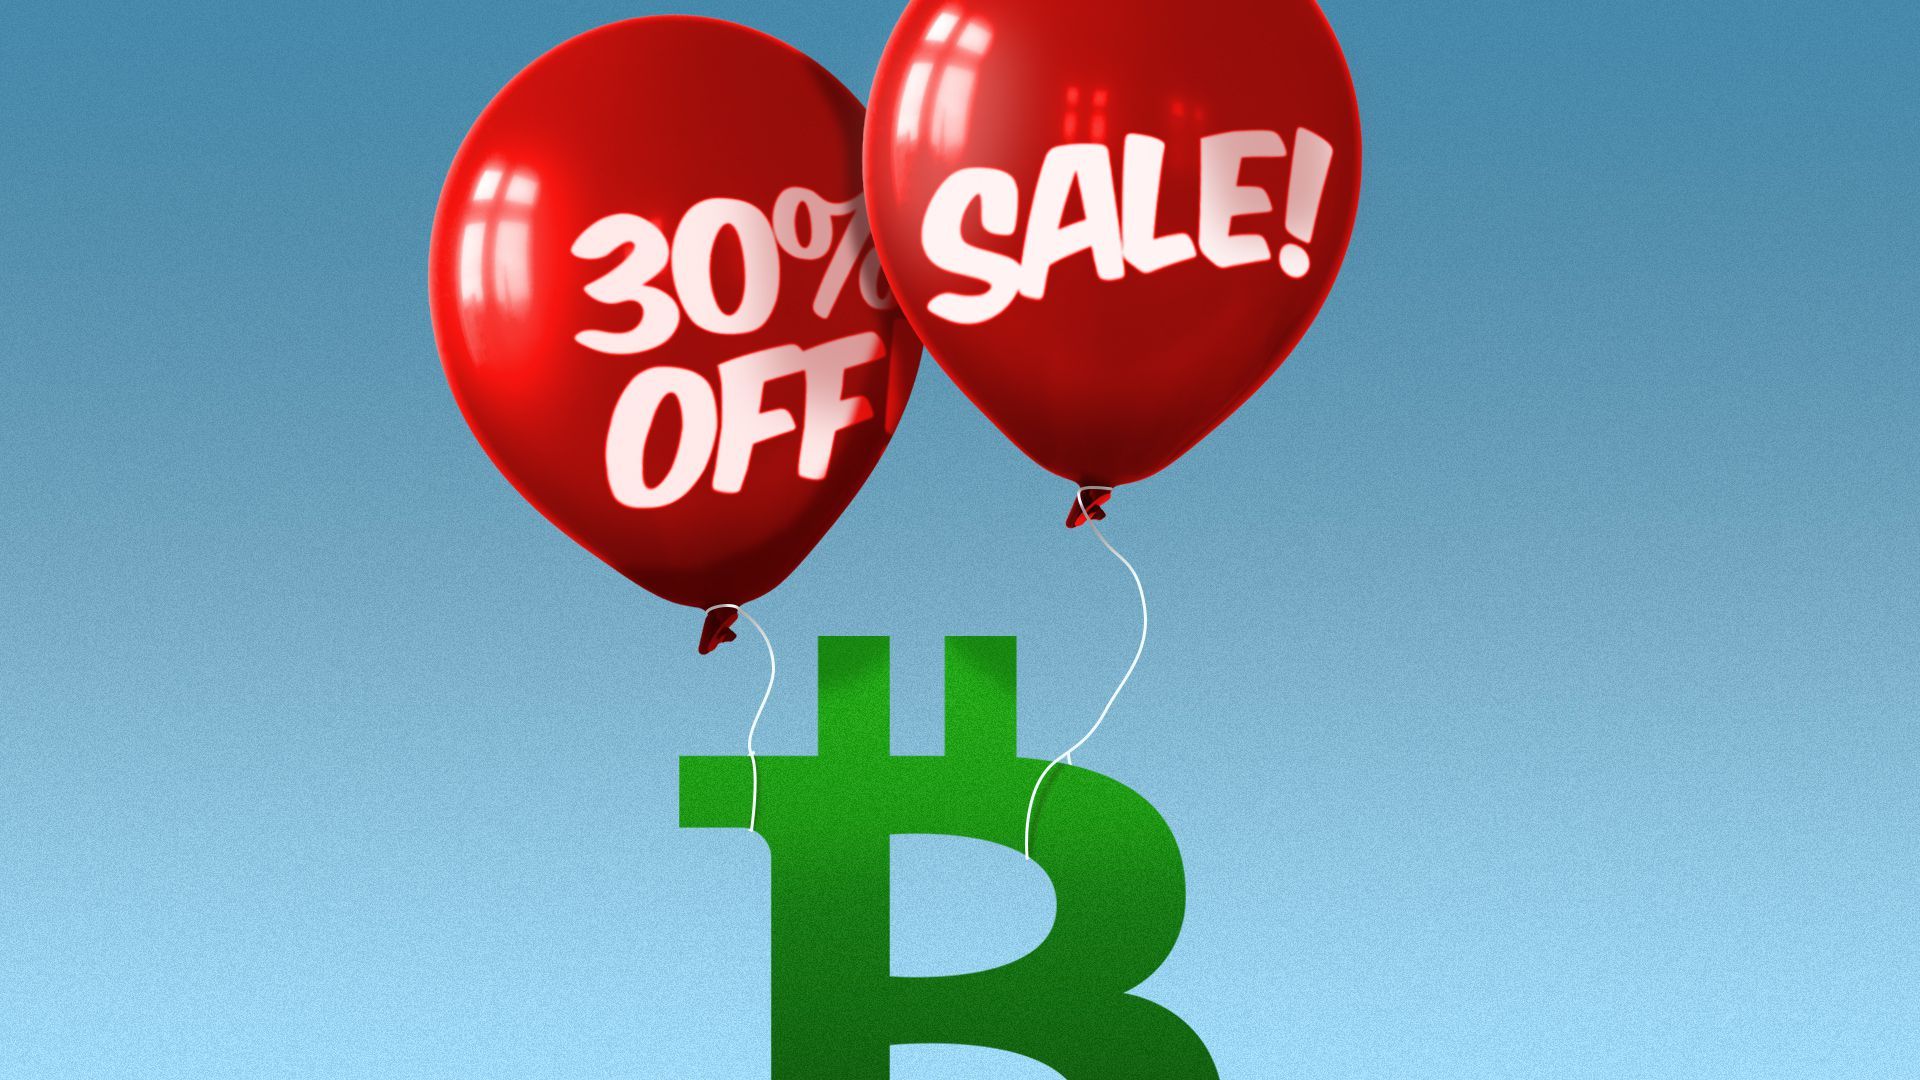 Illustration of the bitcoin logo with balloons that read "30% off! and "sale!" on them attached